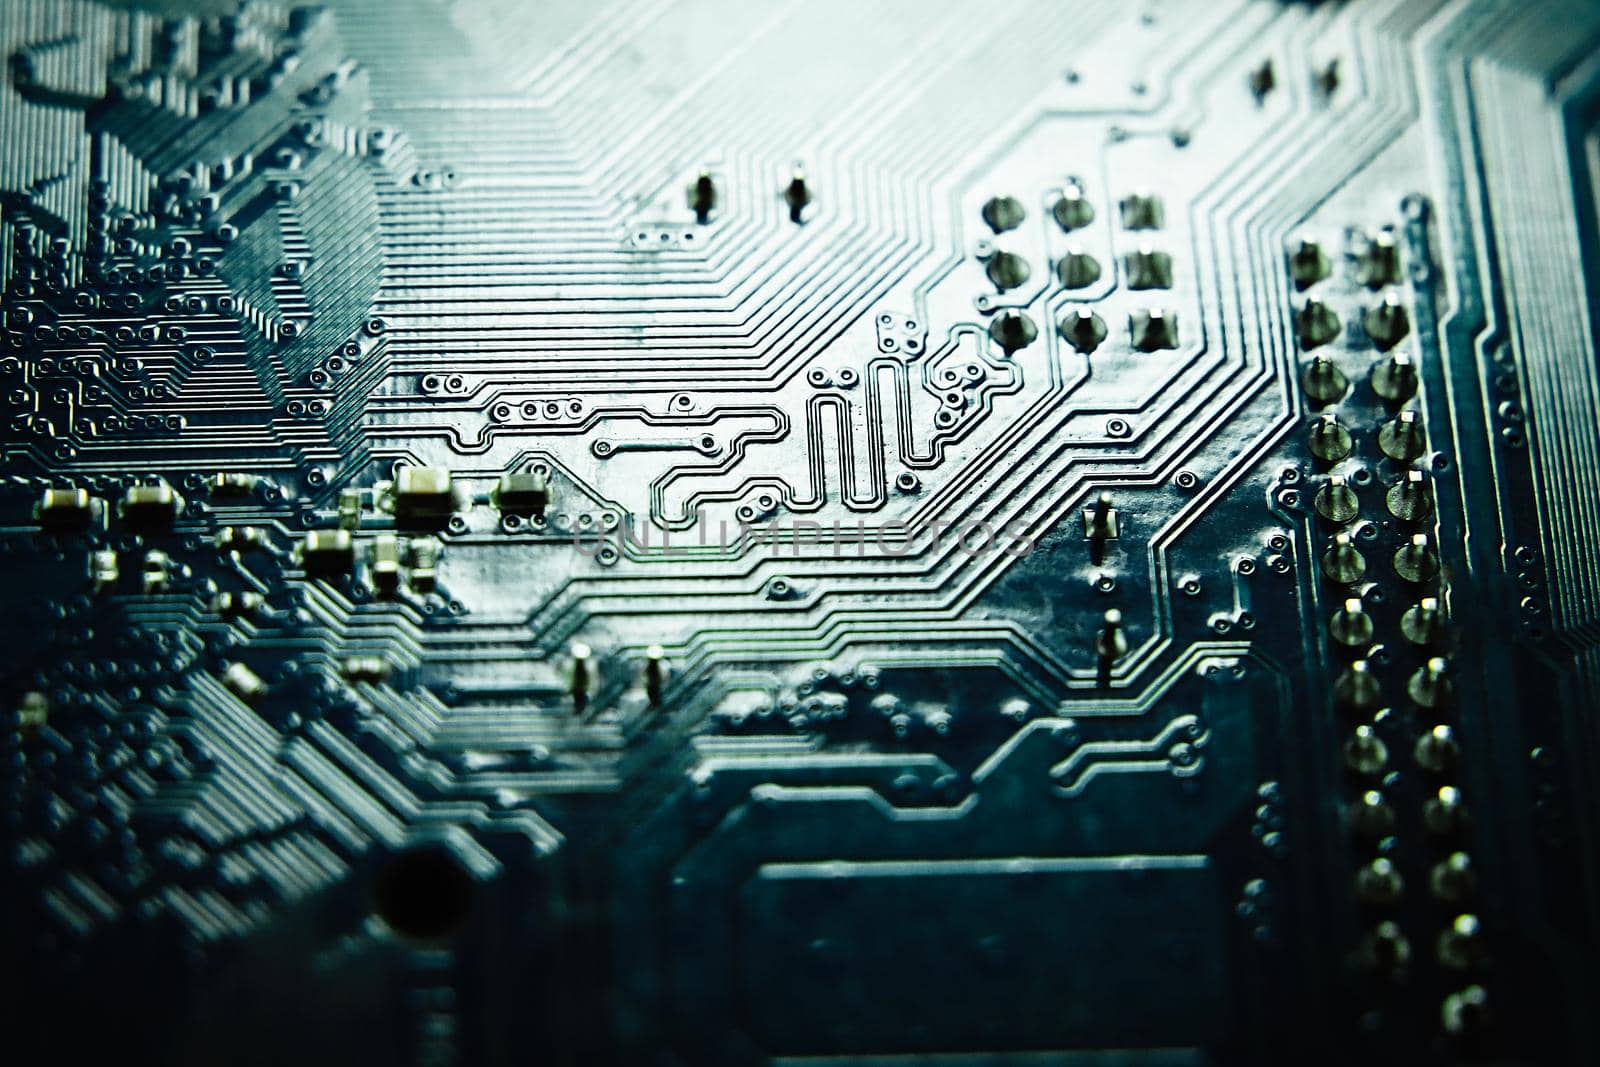 Circuit board. Electronic computer hardware technology components. Motherboard digital science grunge background.